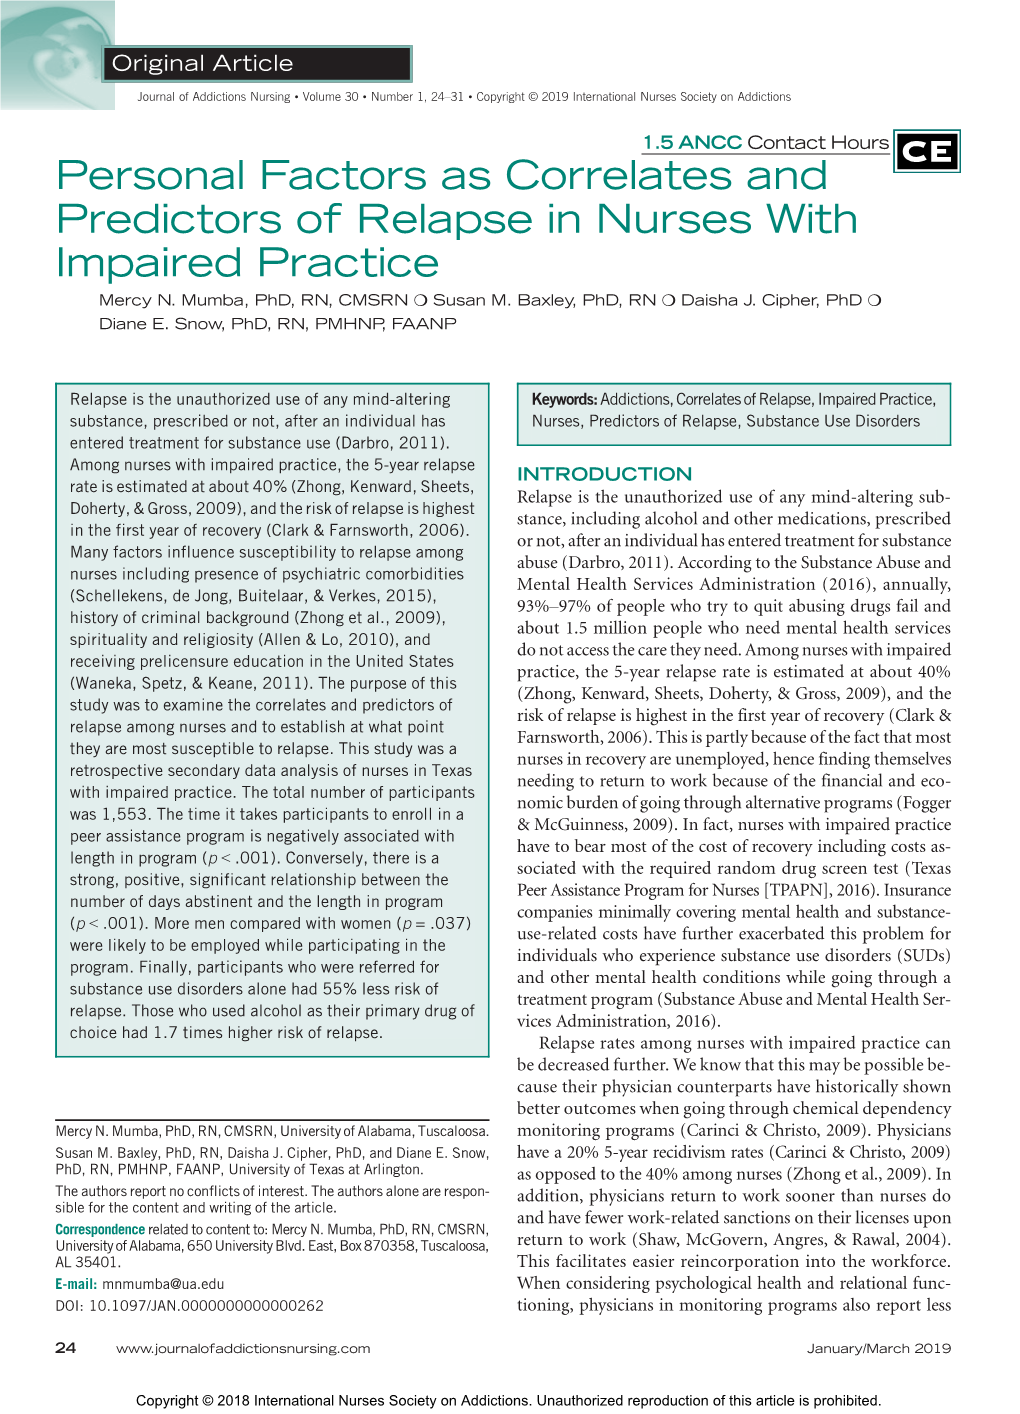 Personal Factors As Correlates and Predictors of Relapse in Nurses with Impaired Practice Mercy N